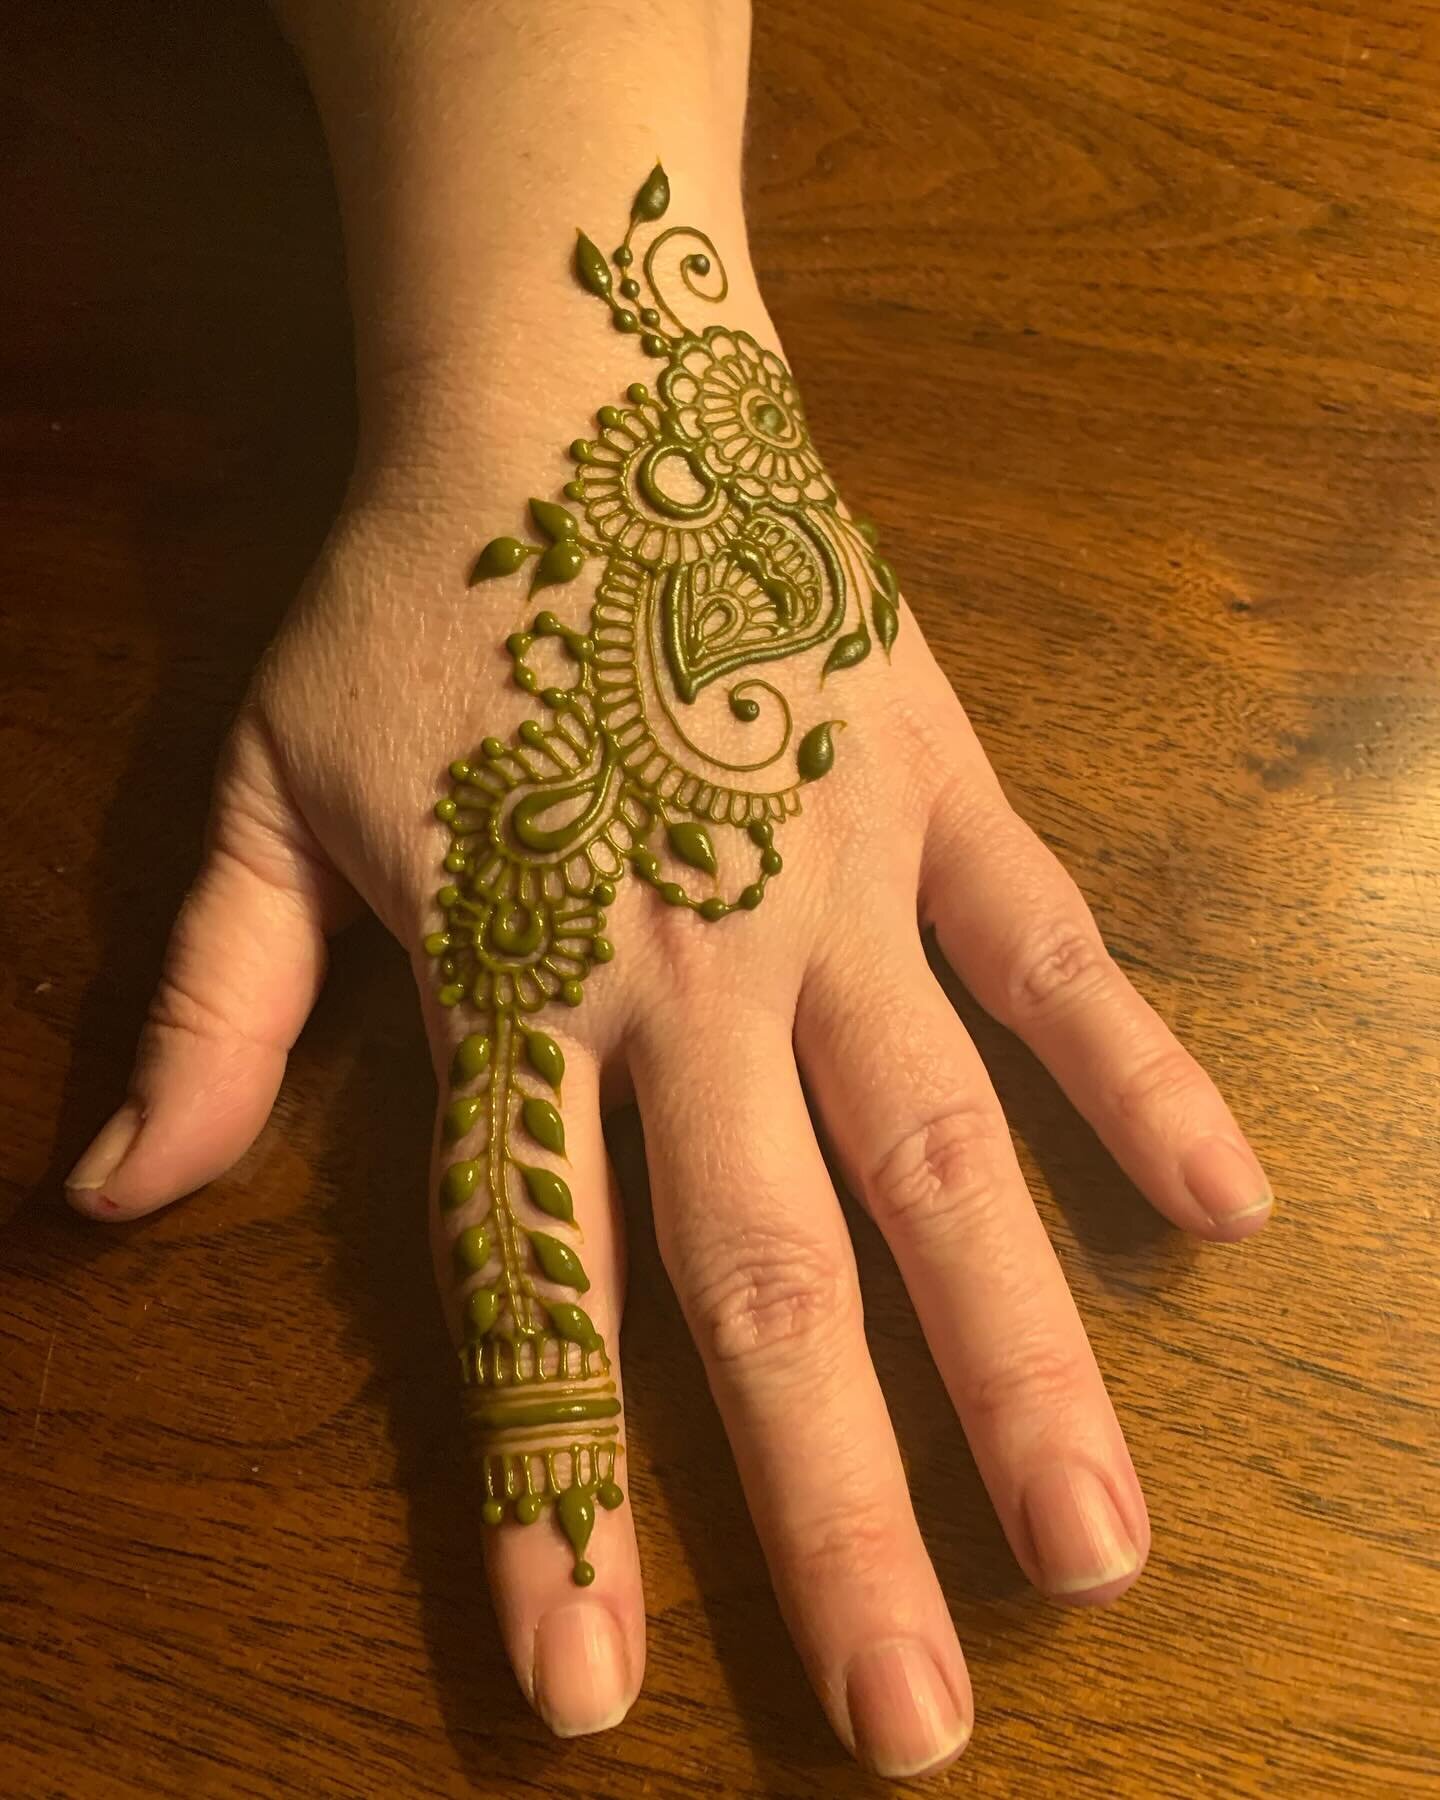 Henna at @stockadetavern for a 39th birthday party! 🥳 

As a small business owner who does henna at people&rsquo;s most special and memorable life celebrations, I pride myself on providing fantastic customer service. I&rsquo;ve had several clients t